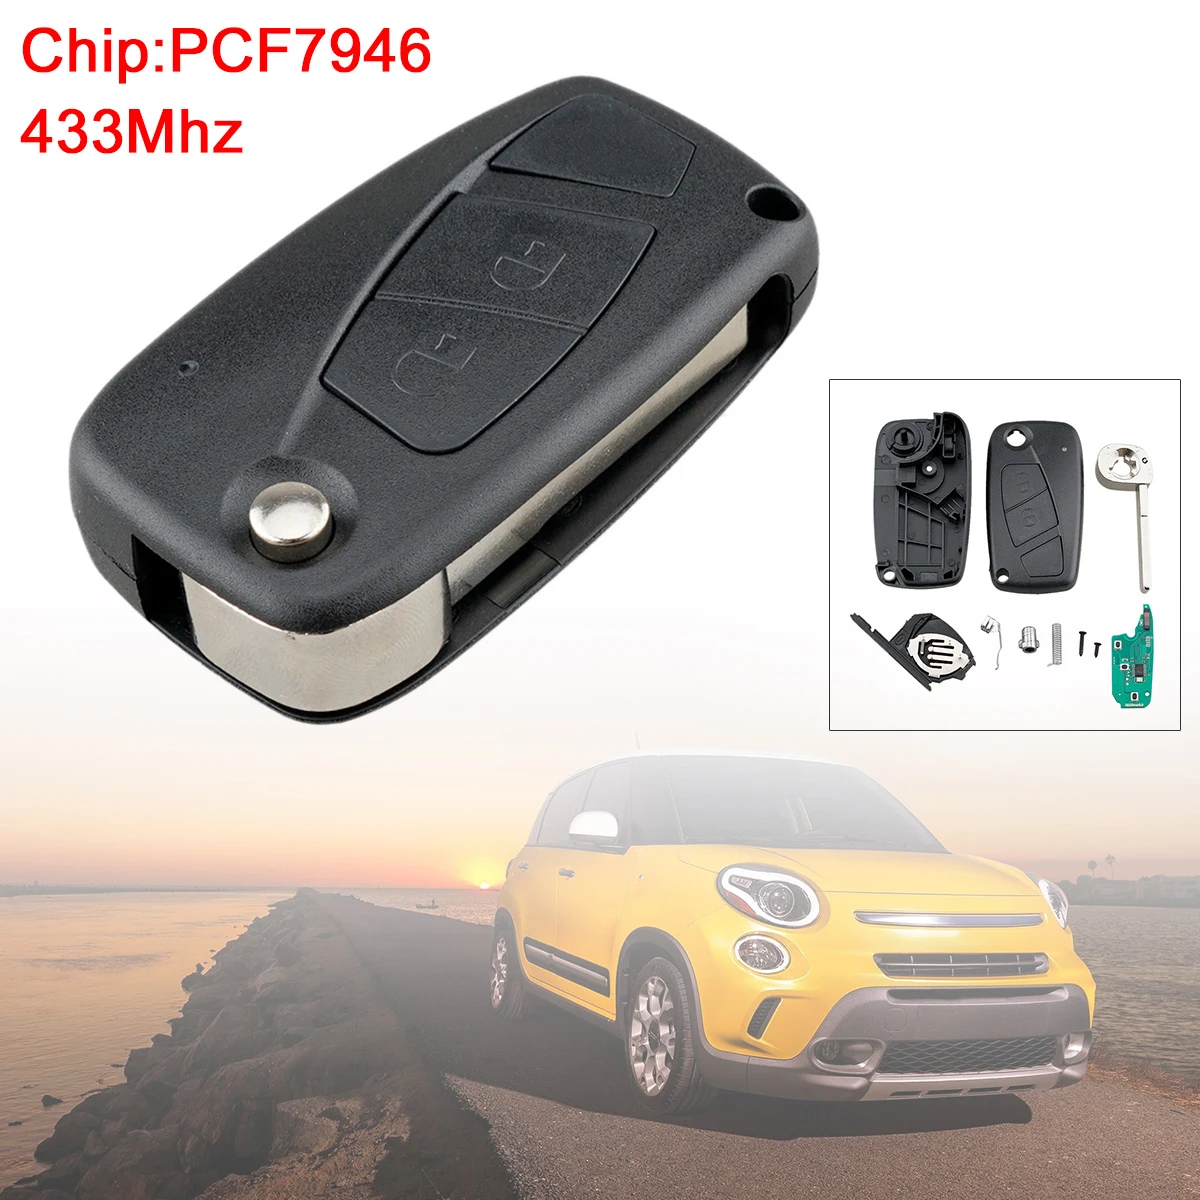 433Mhz 2 Buttons Flip Remote Car Key Fob with PCF7946 Chip Black Keyless Entry Transmitter for Fiat 500 Panda Bravo Punto Ducato 12v universal automatic keyless entry system car start and stop buttons keychain kit central door lock with remote control